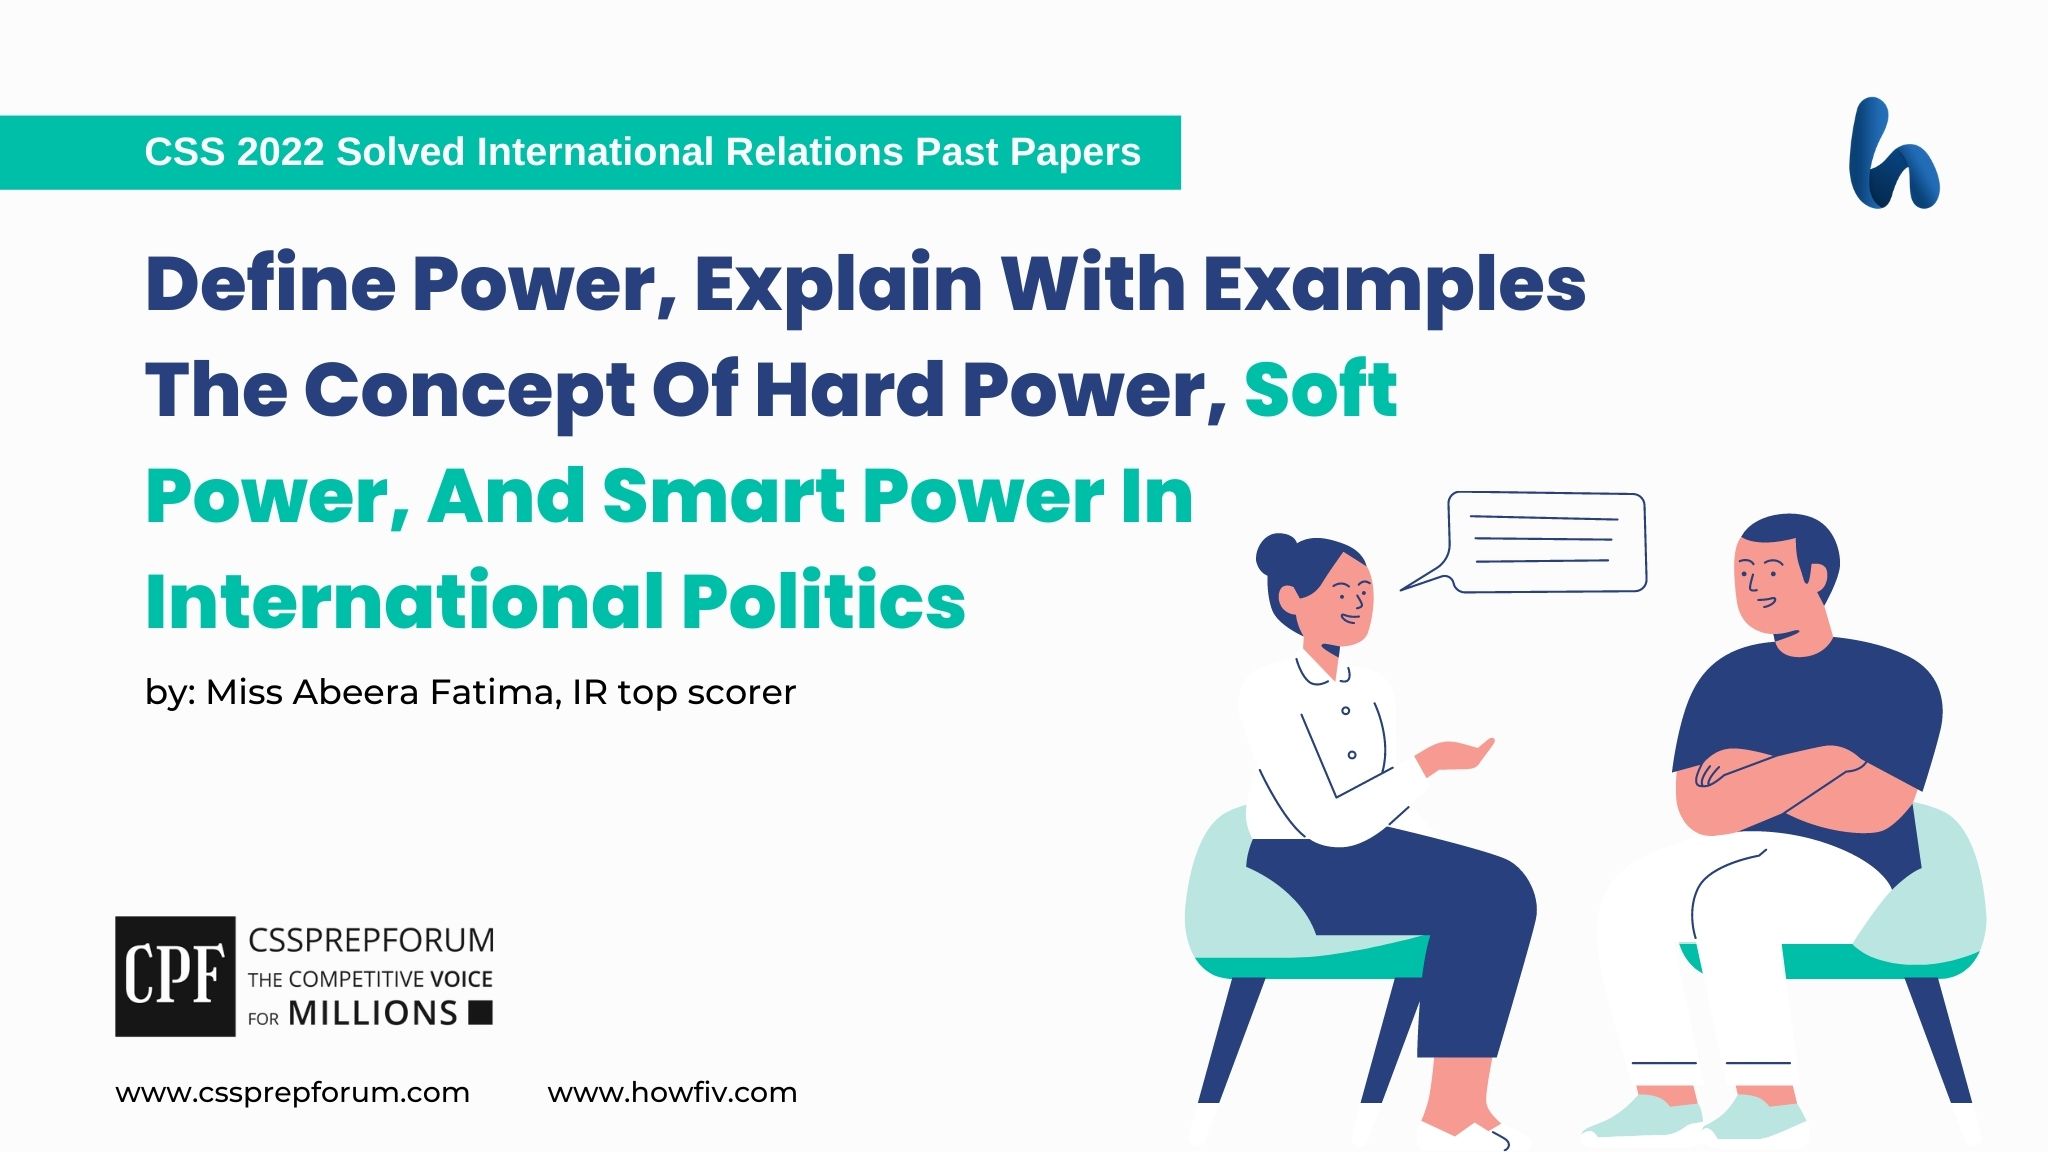 Q5. define power, explain with examples the concept of hard power, soft power, and smart power in international politics. 2022